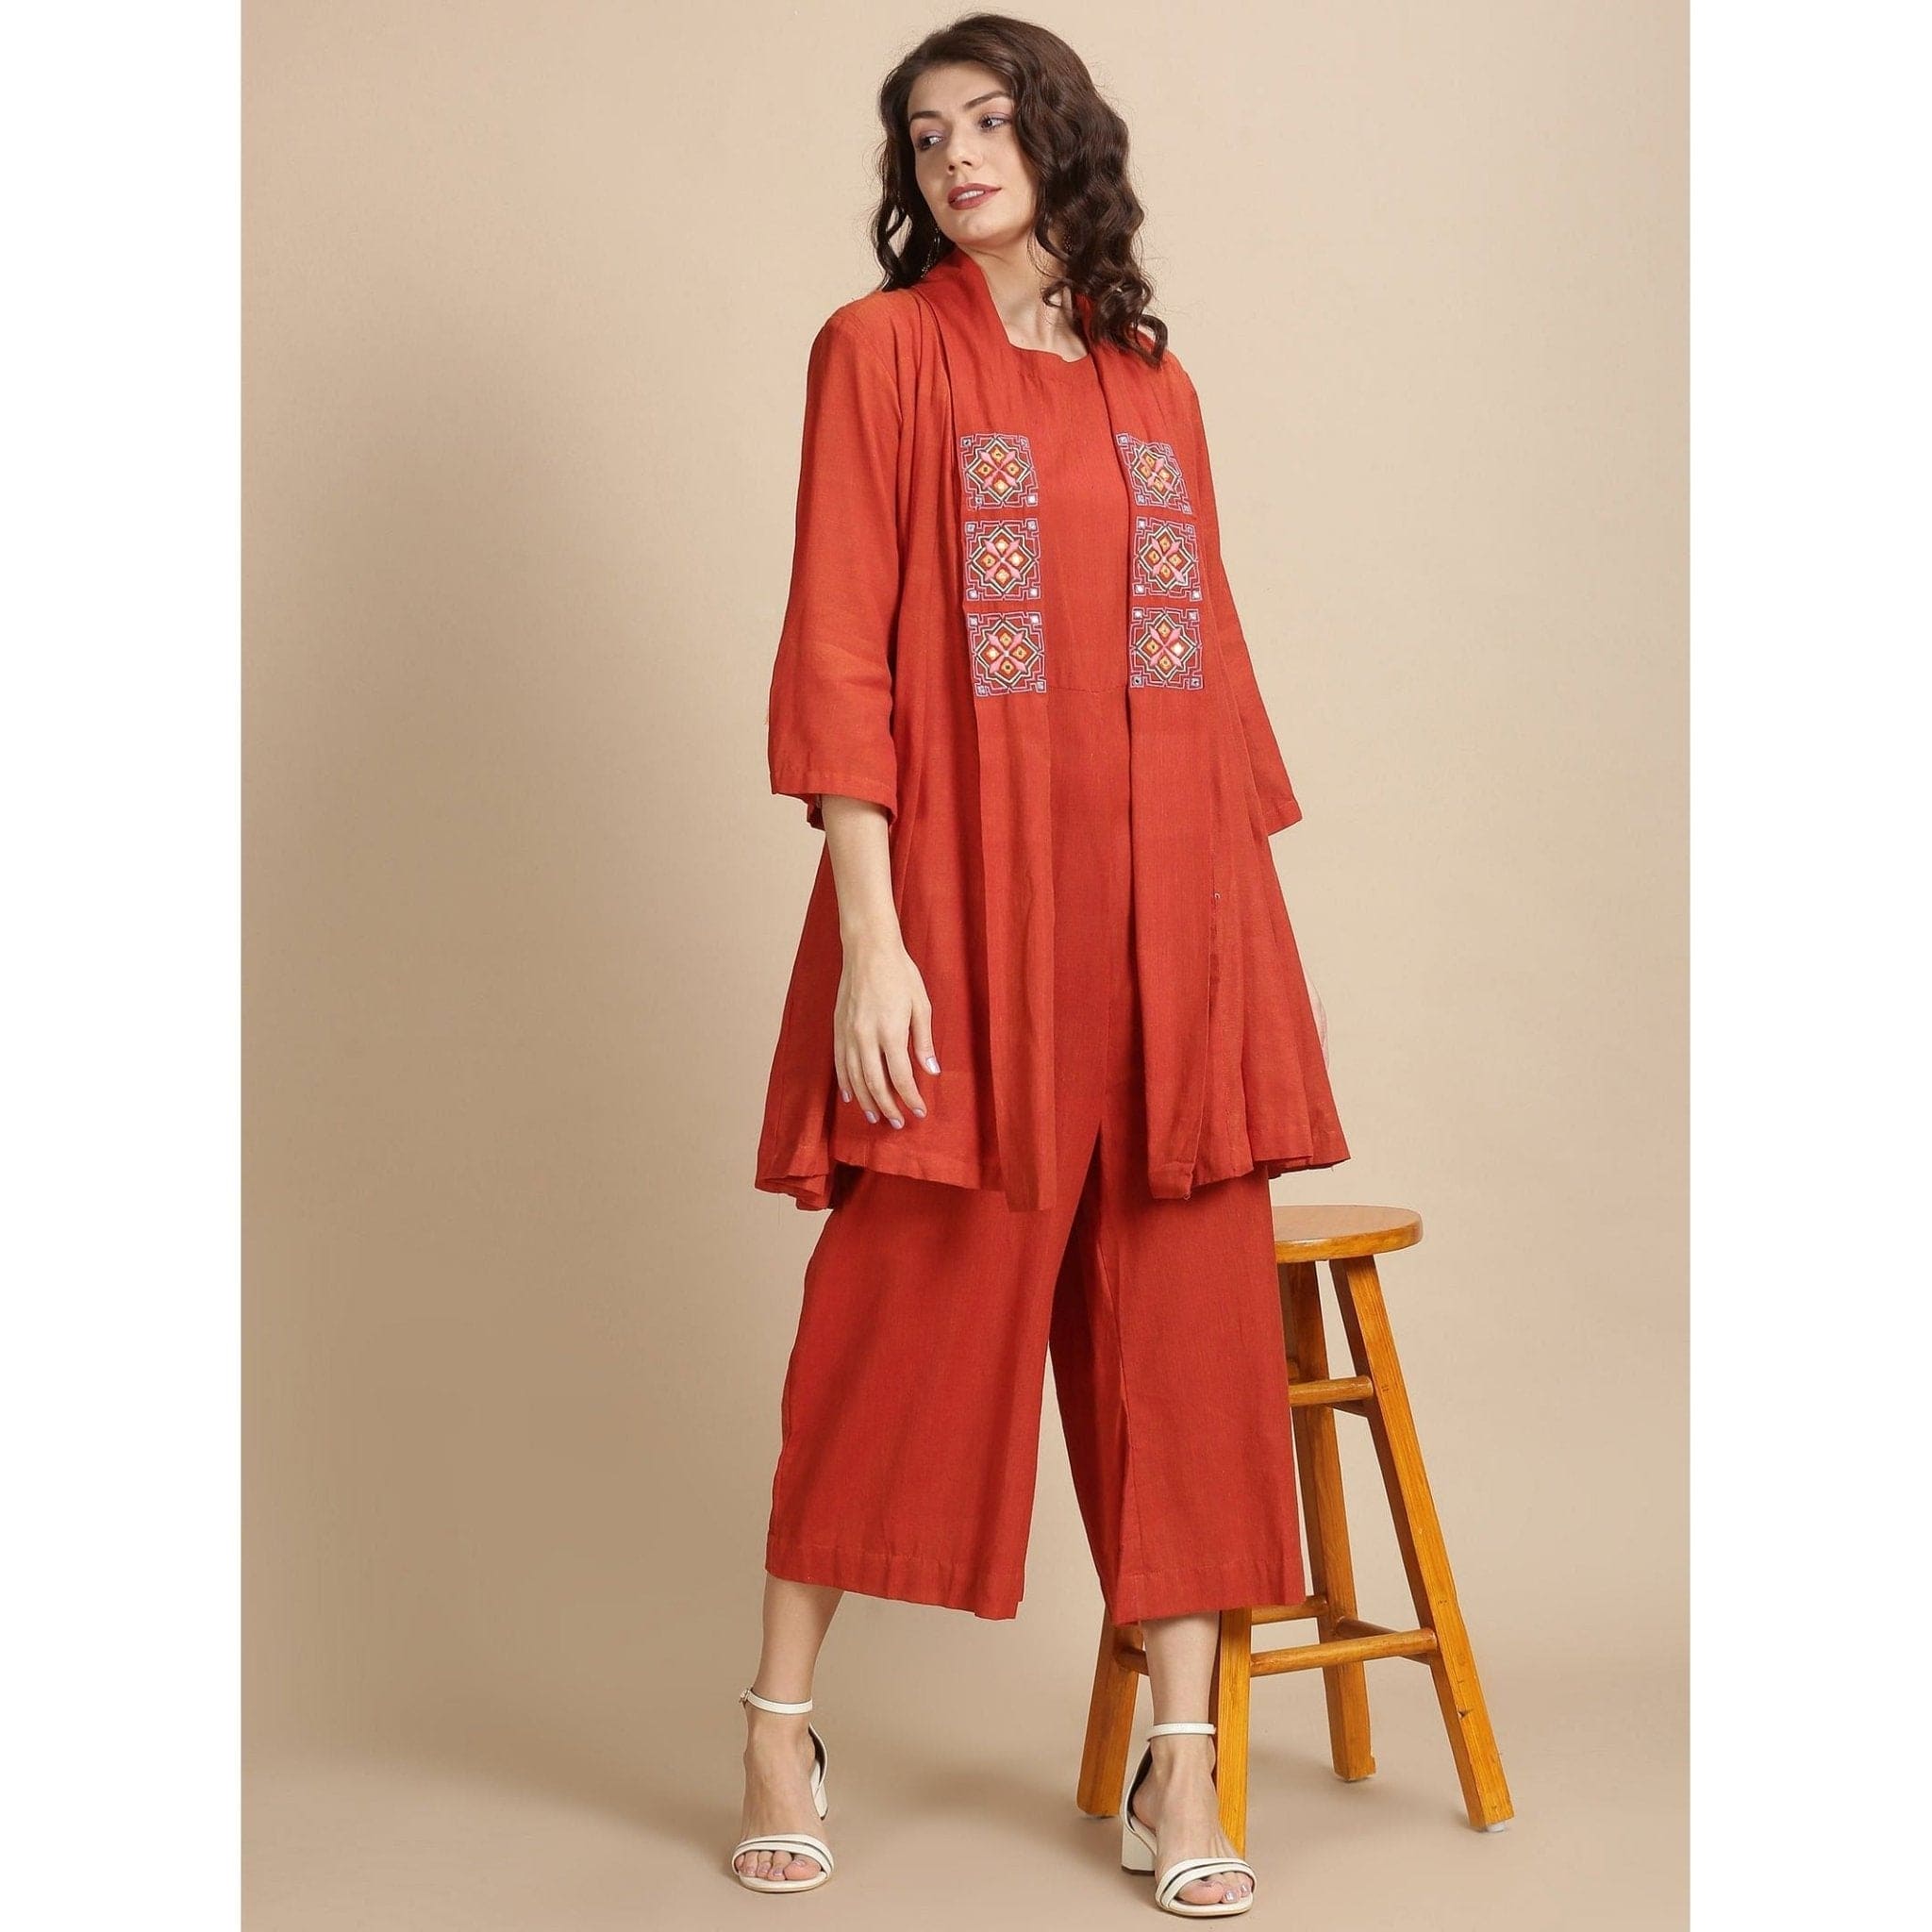 Red Cotton Jumpsuit with Shrug Set - Charkha TalesRed Cotton Jumpsuit with Shrug Set